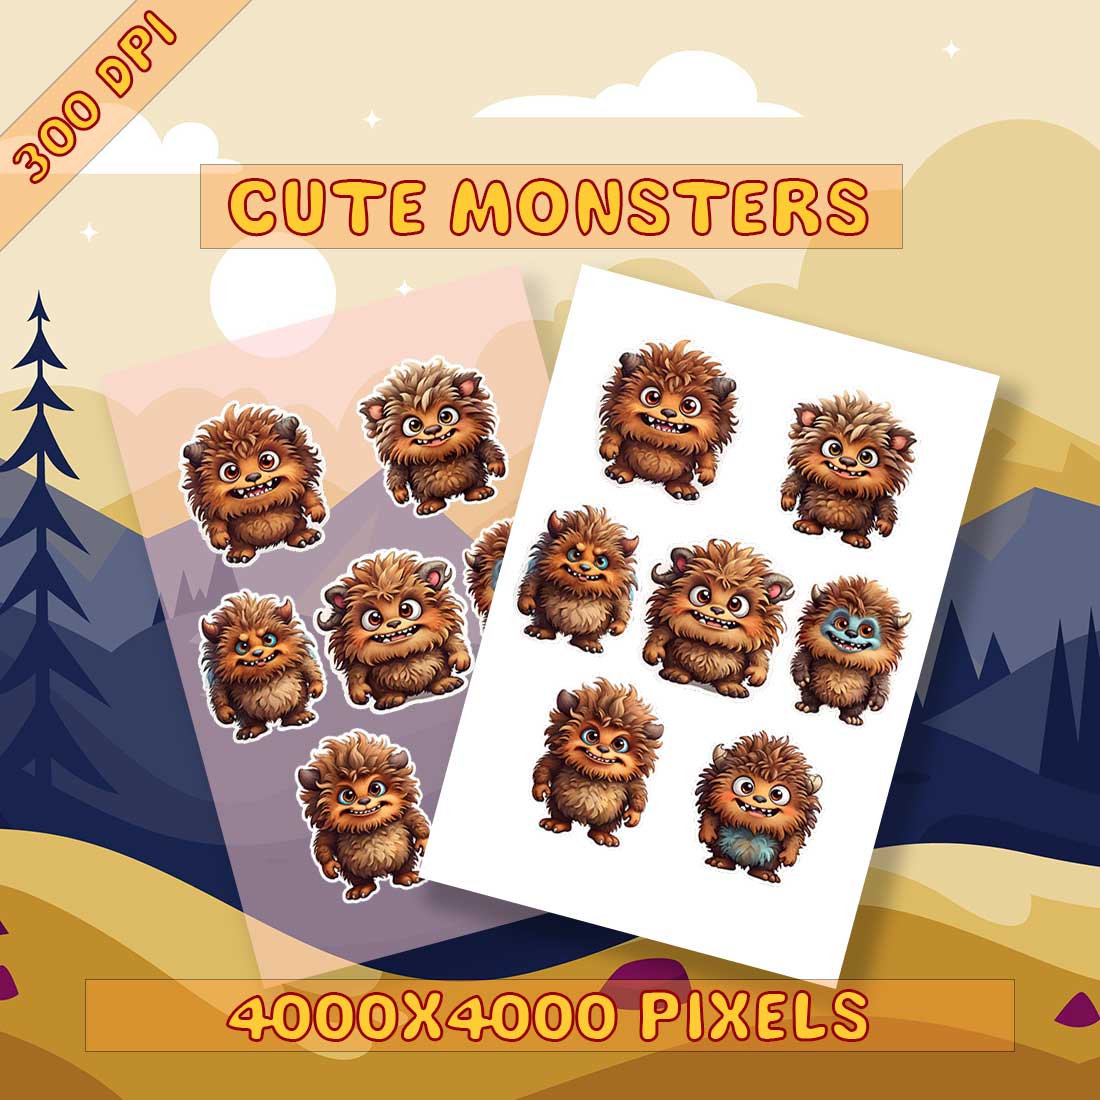 Brown Monsters Cute Stickers cover image.